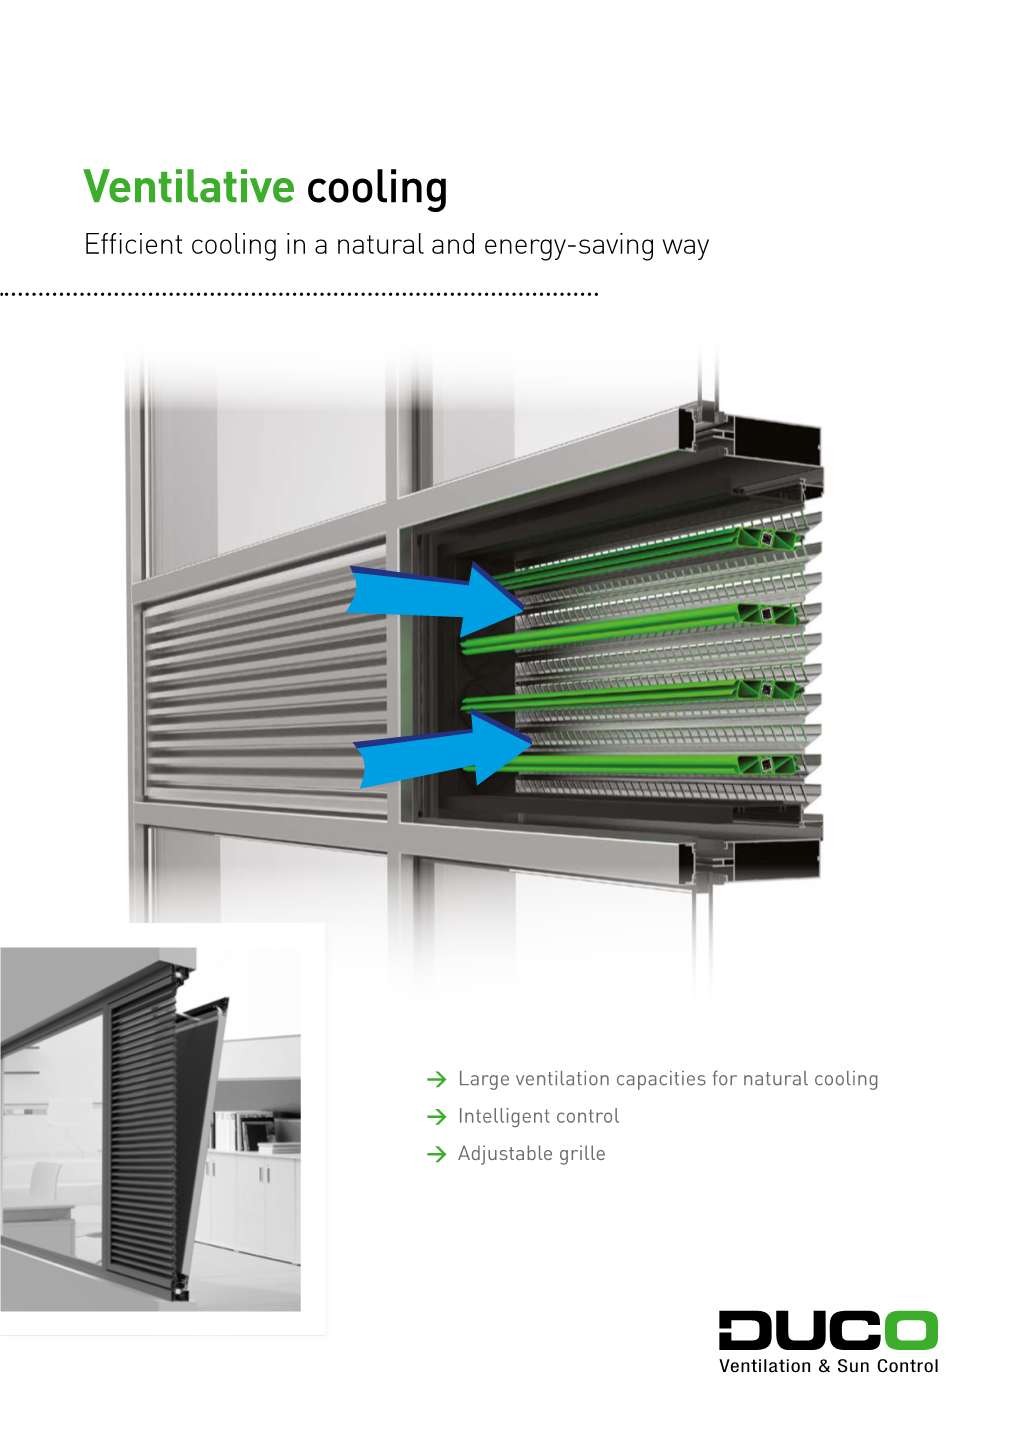 Ventilative Cooling Efficient Cooling in a Natural and Energy-Saving Way